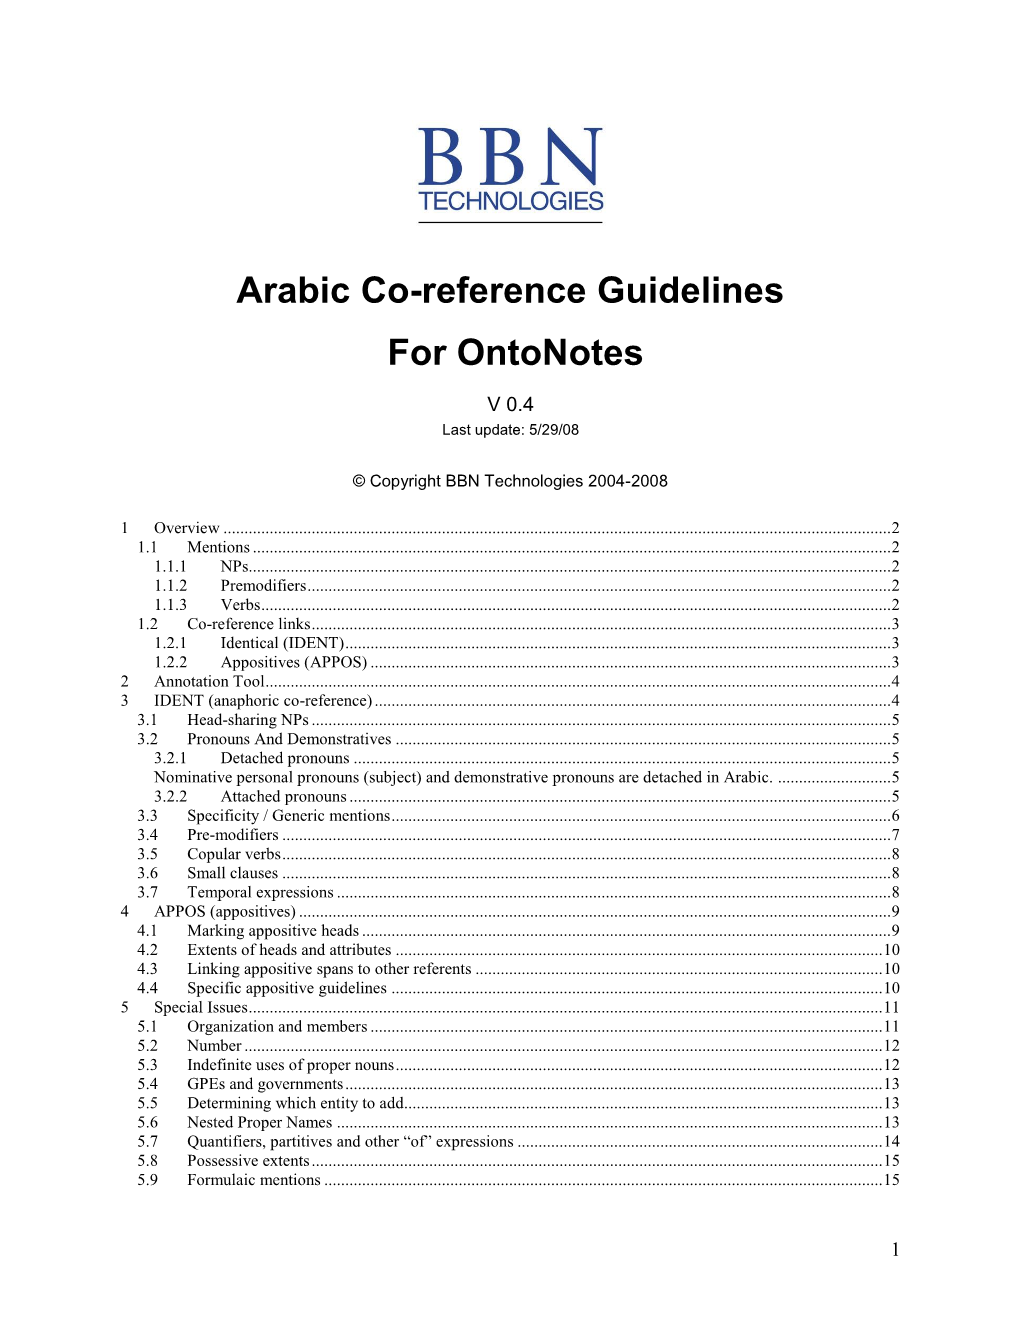 Arabic Co-Reference Guidelines for Ontonotes